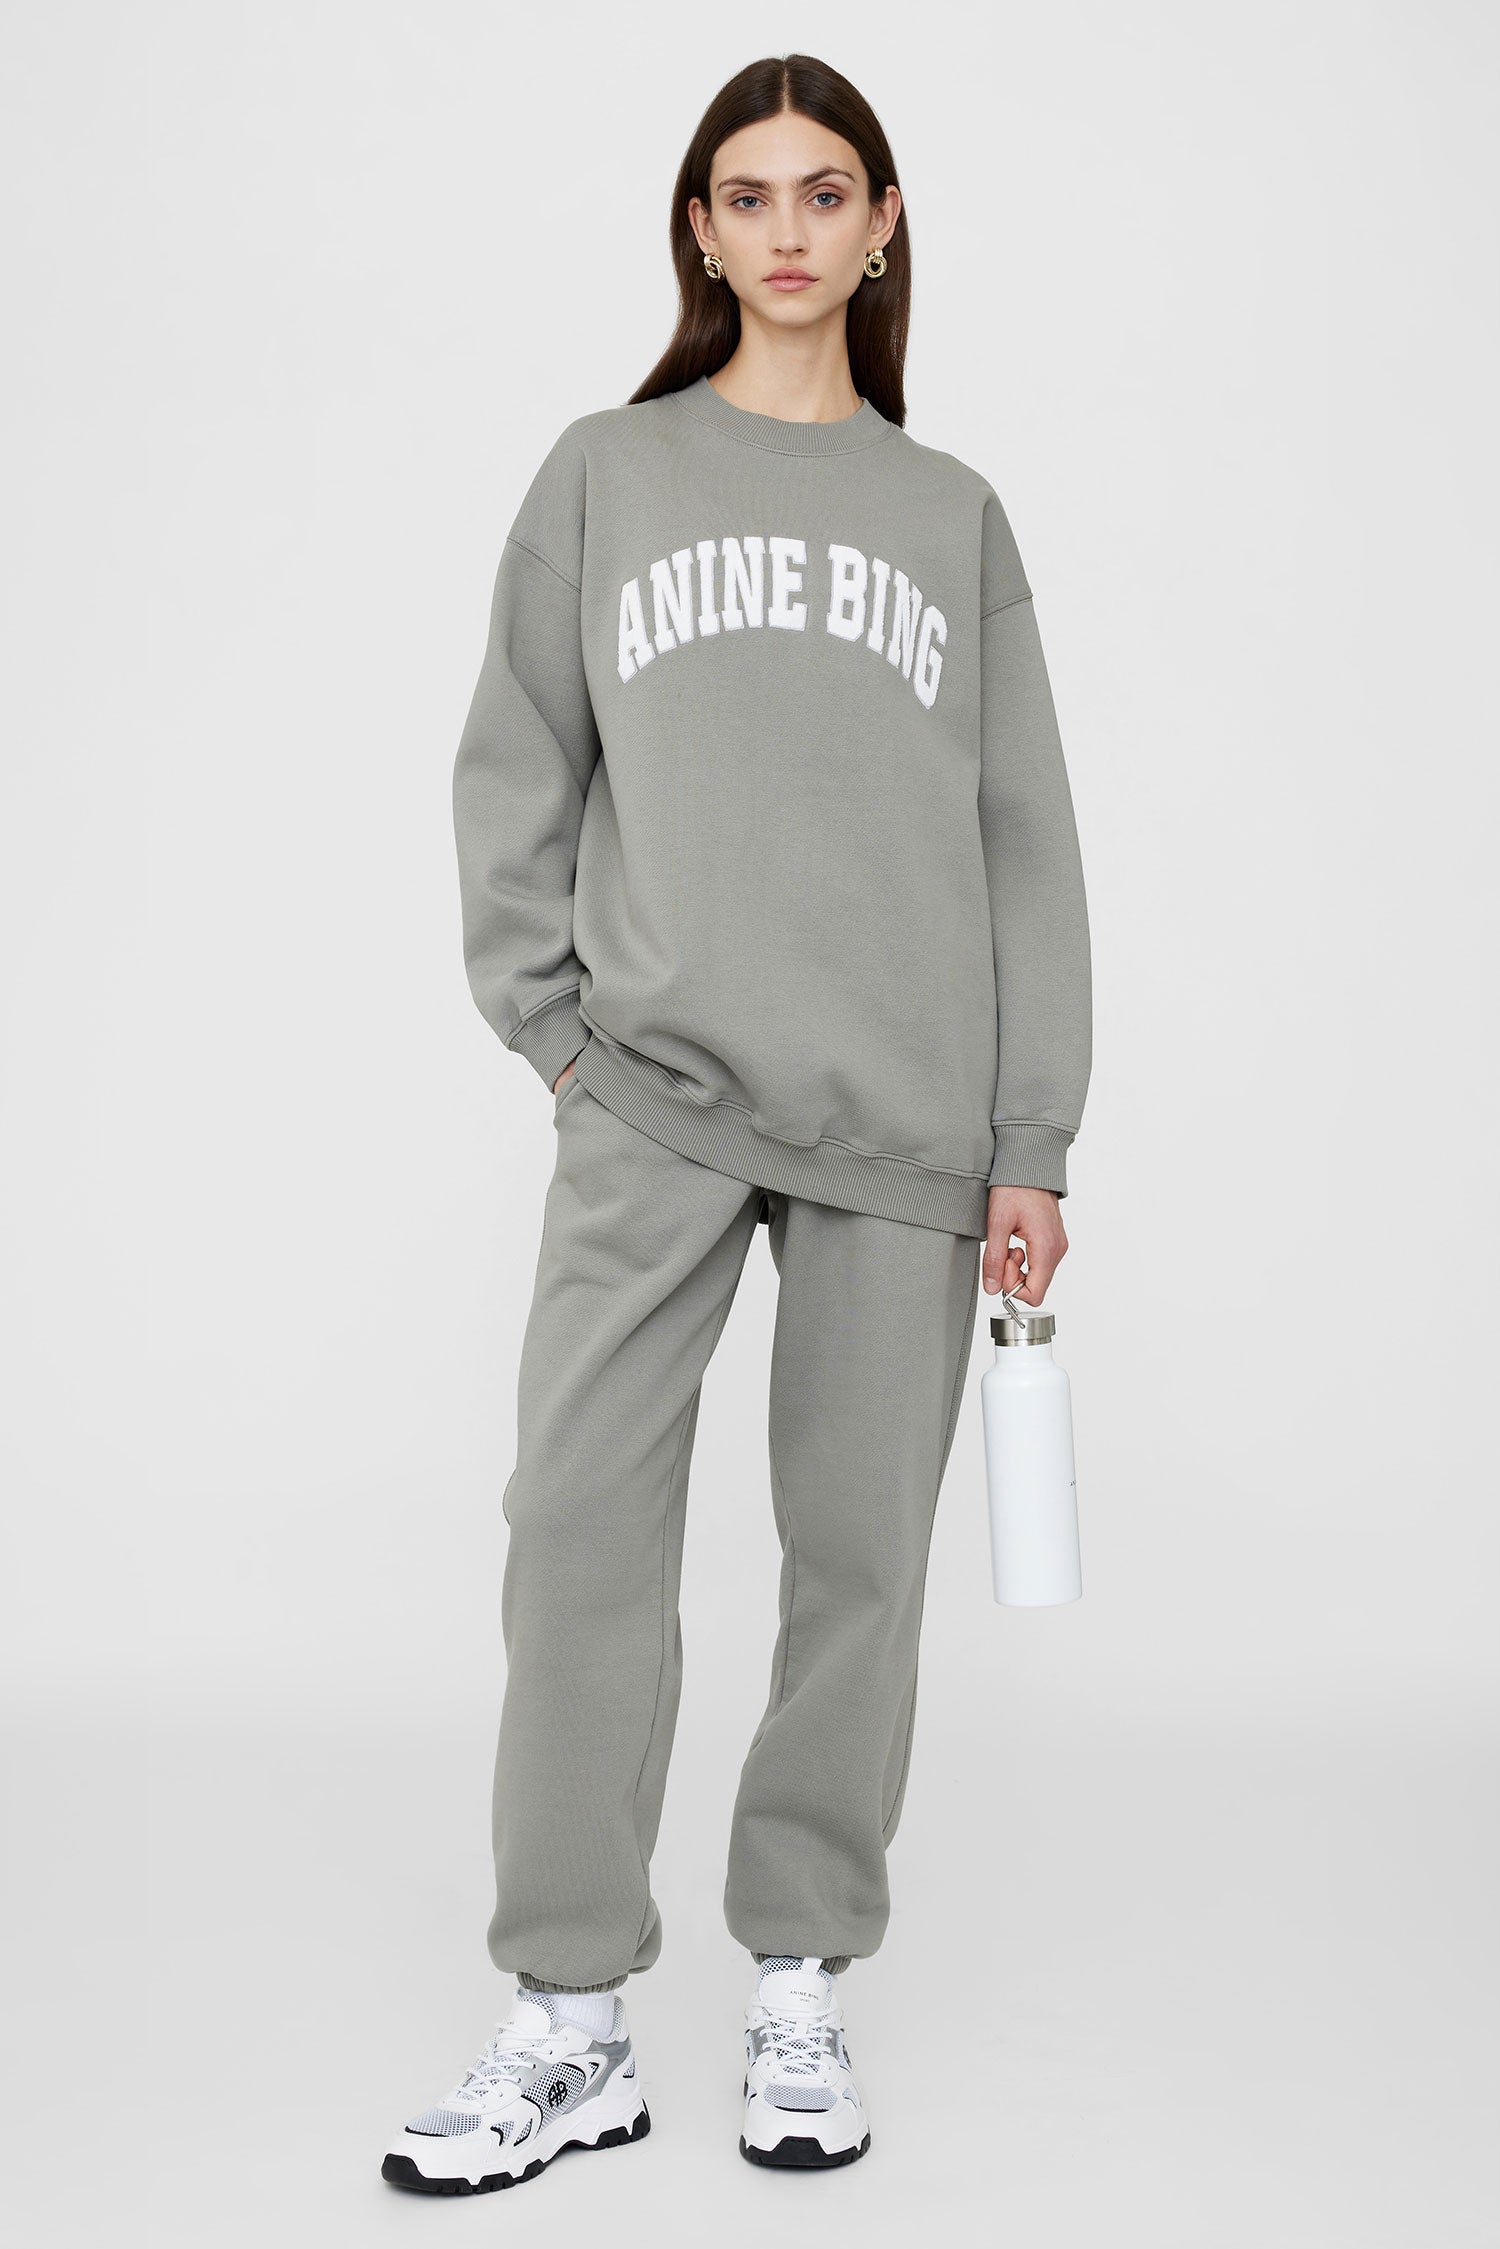 The Anine Bing Tyler Sweatshirt in Storm Grey available at The New Trend Australia